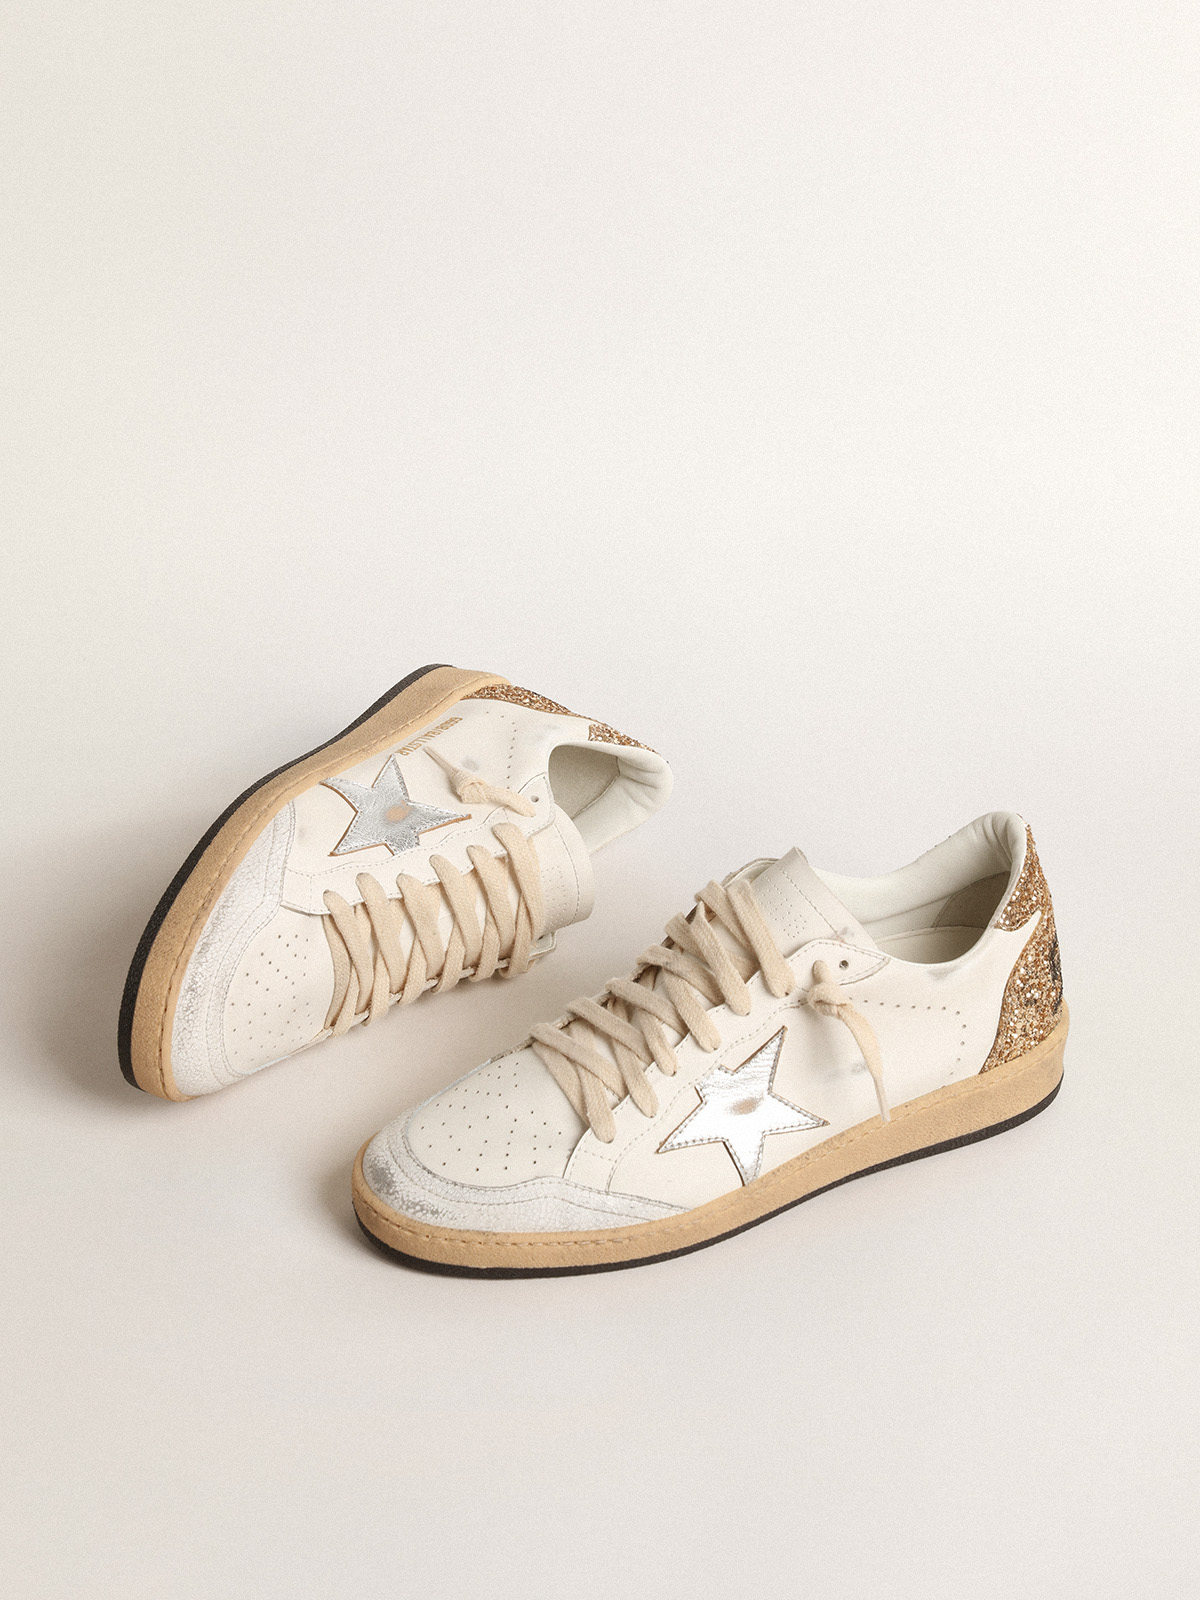 Ball Star with metallic leather star and glitter heel tab | Golden Goose